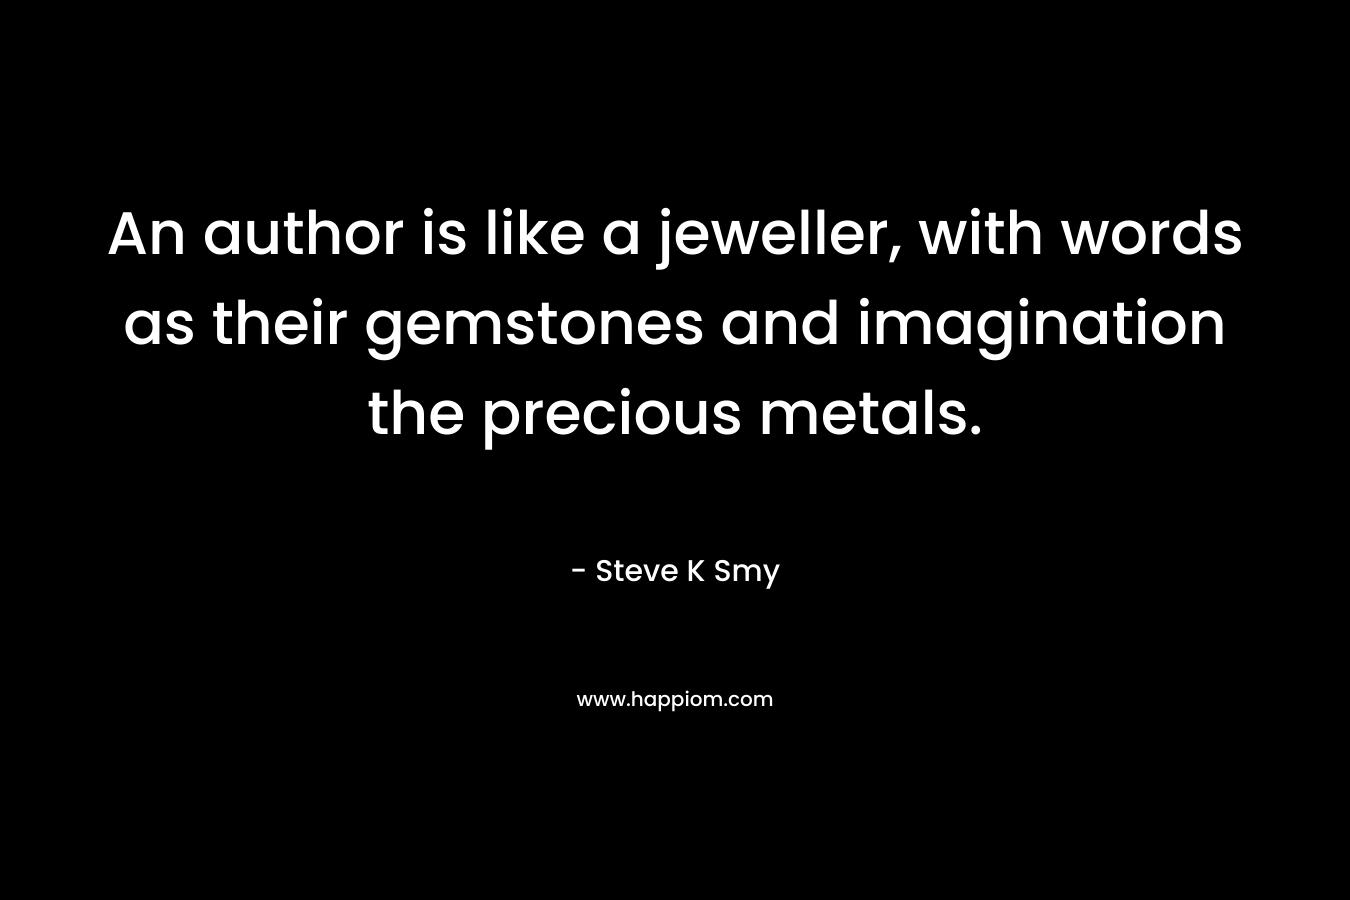 An author is like a jeweller, with words as their gemstones and imagination the precious metals.